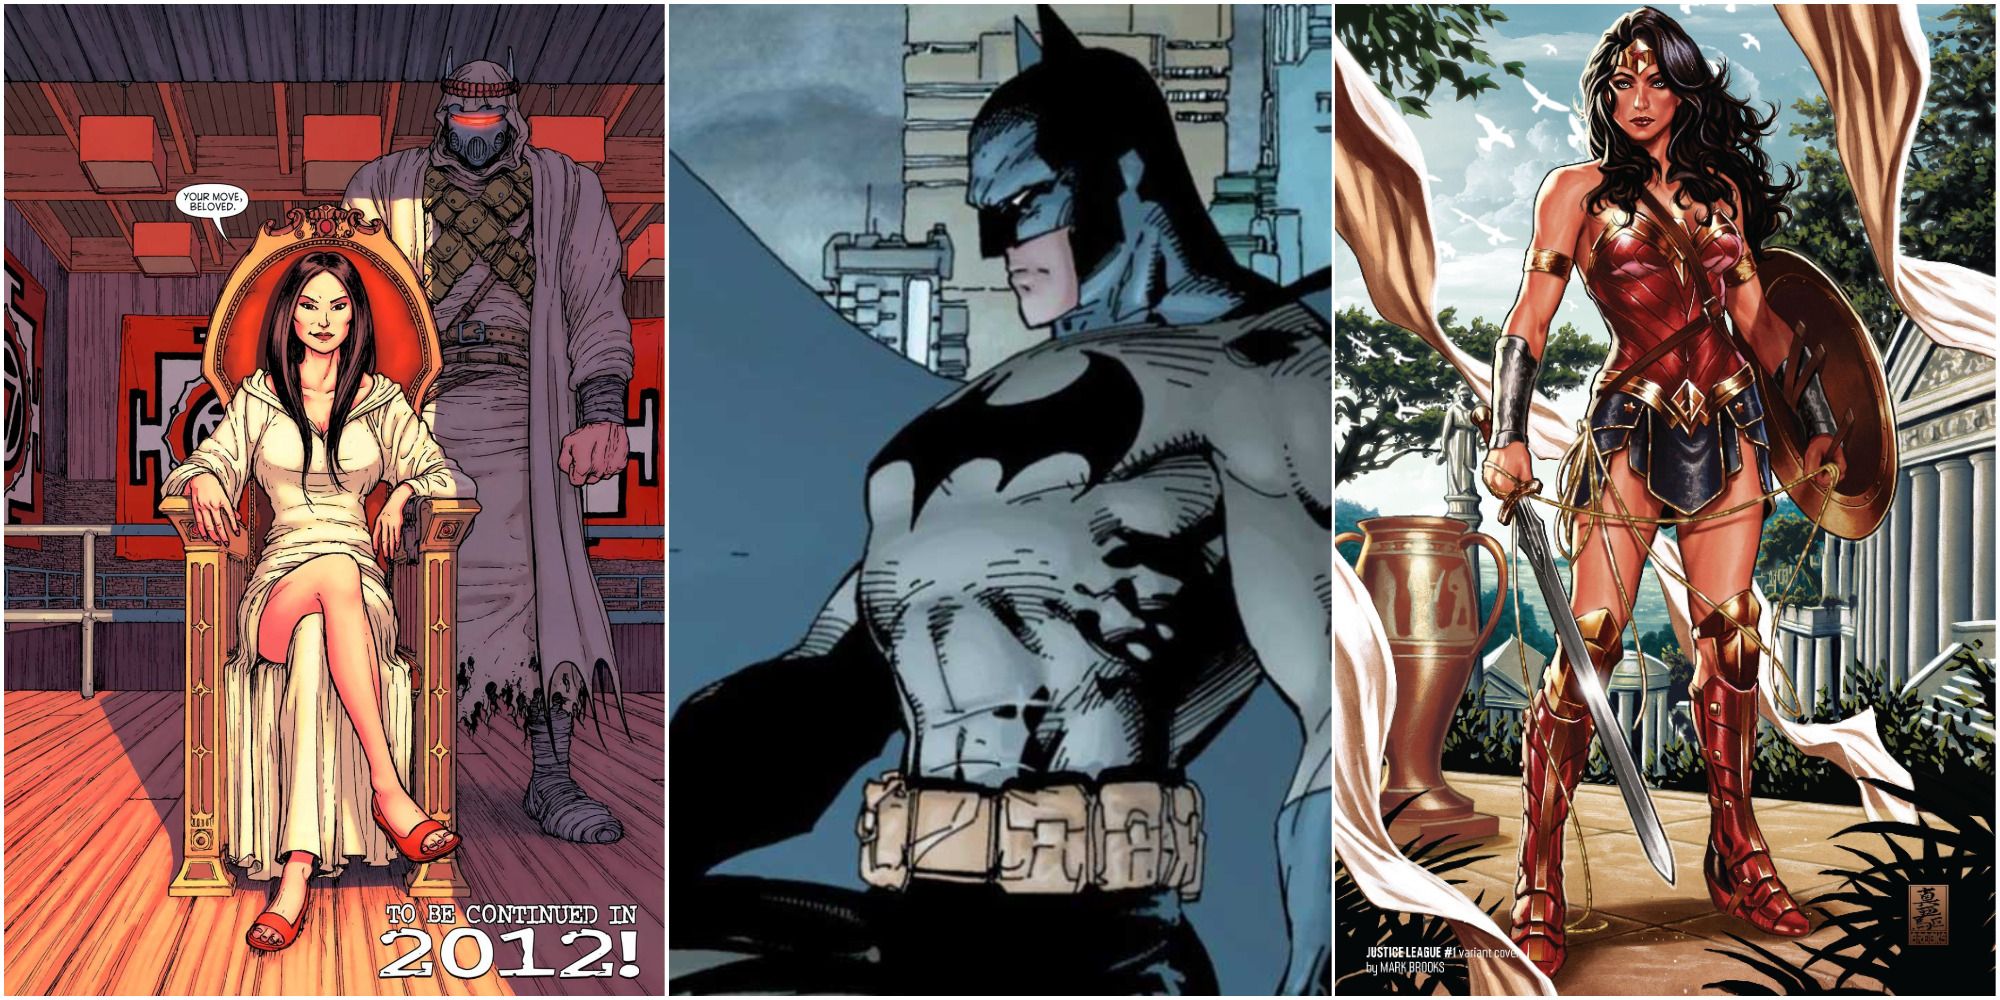 10 DC Characters Who Are A Better Match For Batman Than Catwoman